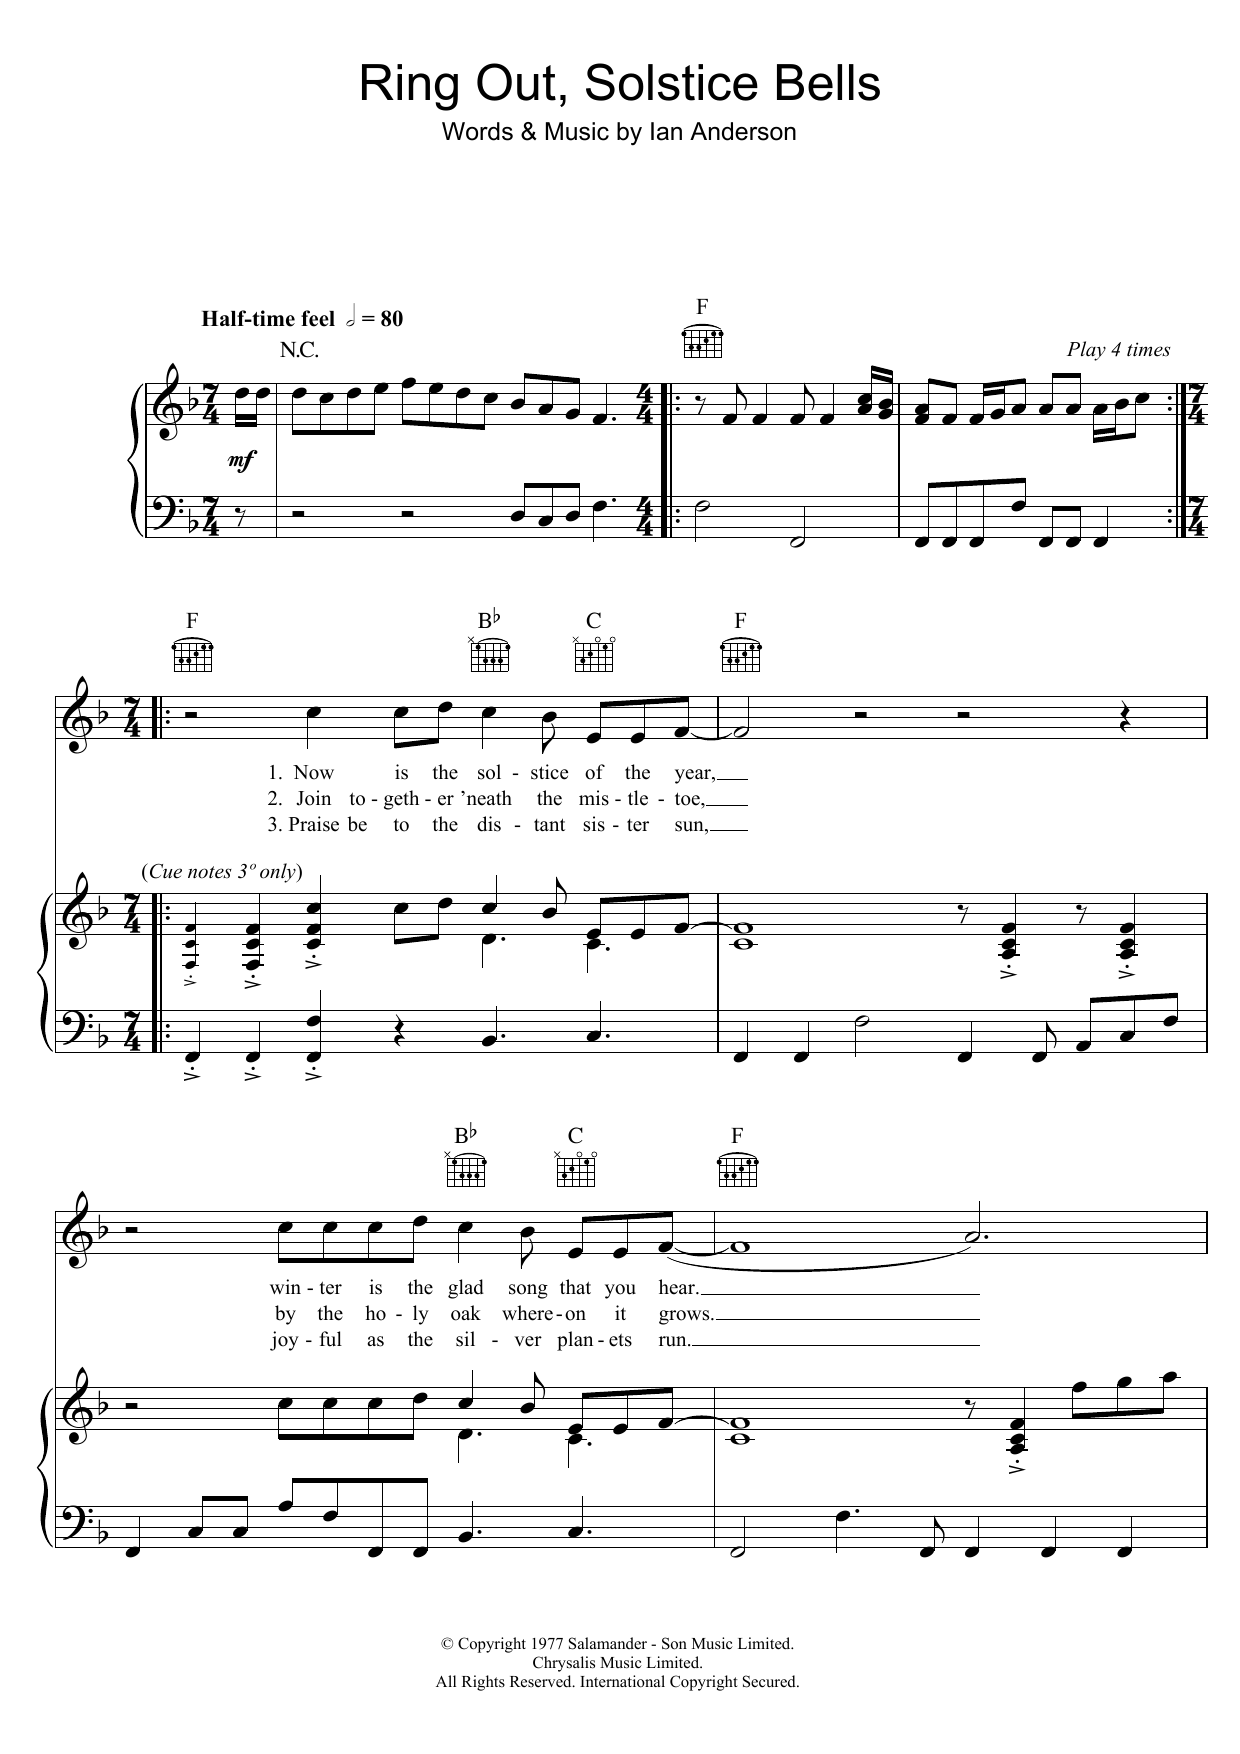 Download Jethro Tull Ring Out, Solstice Bells Sheet Music